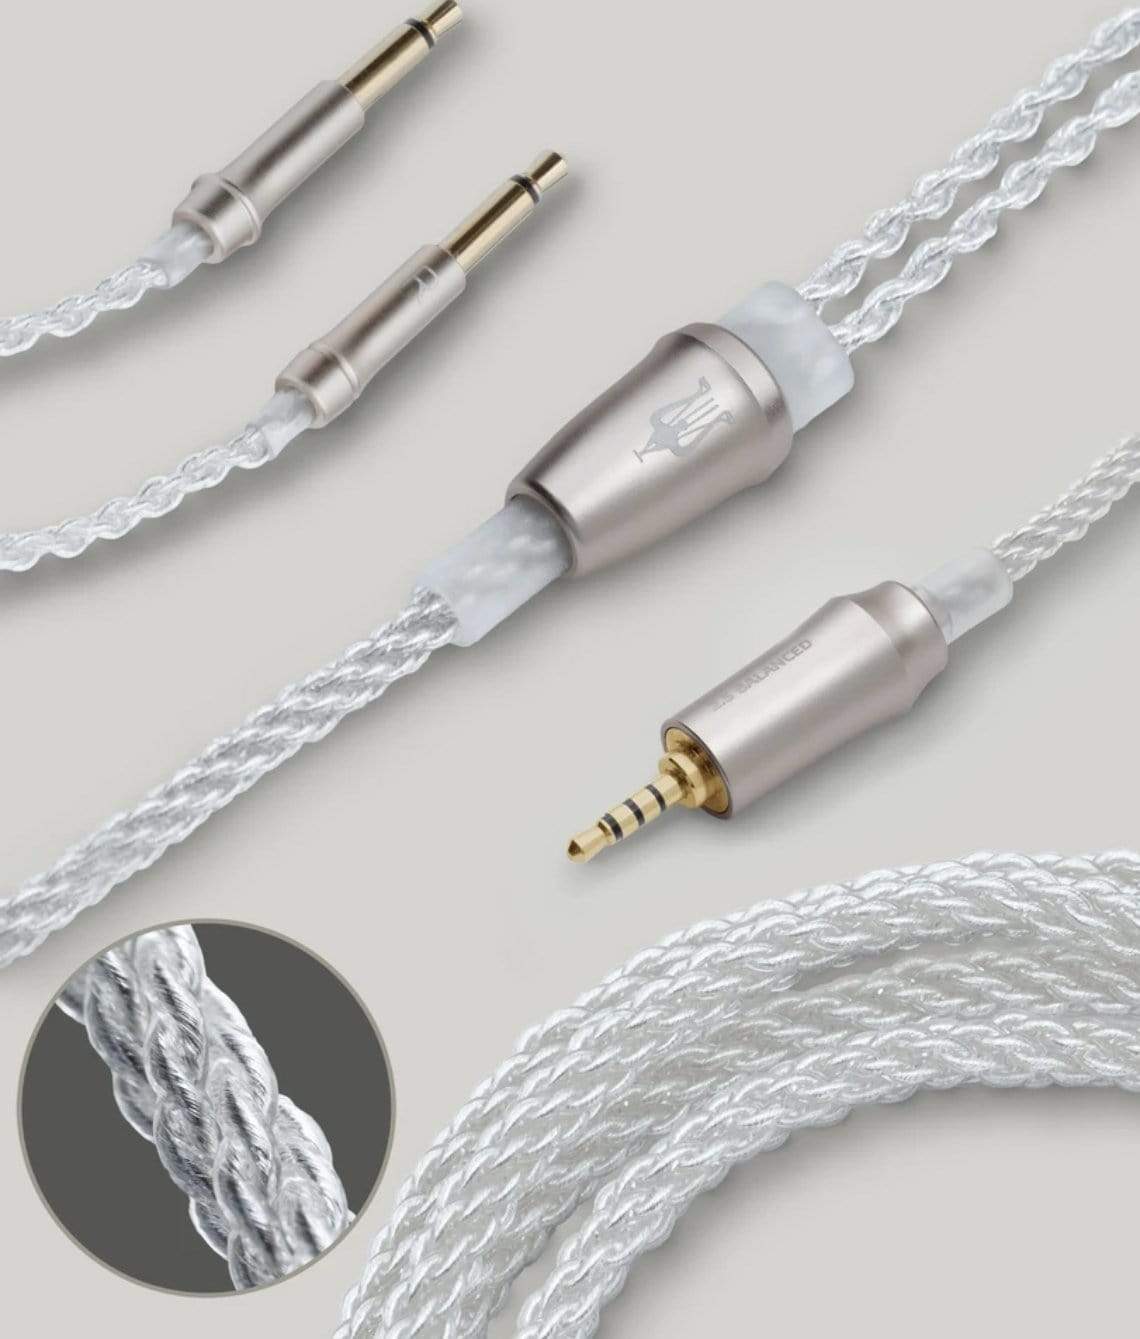 Meze 99 Series Silver Plated Upgrade Cables